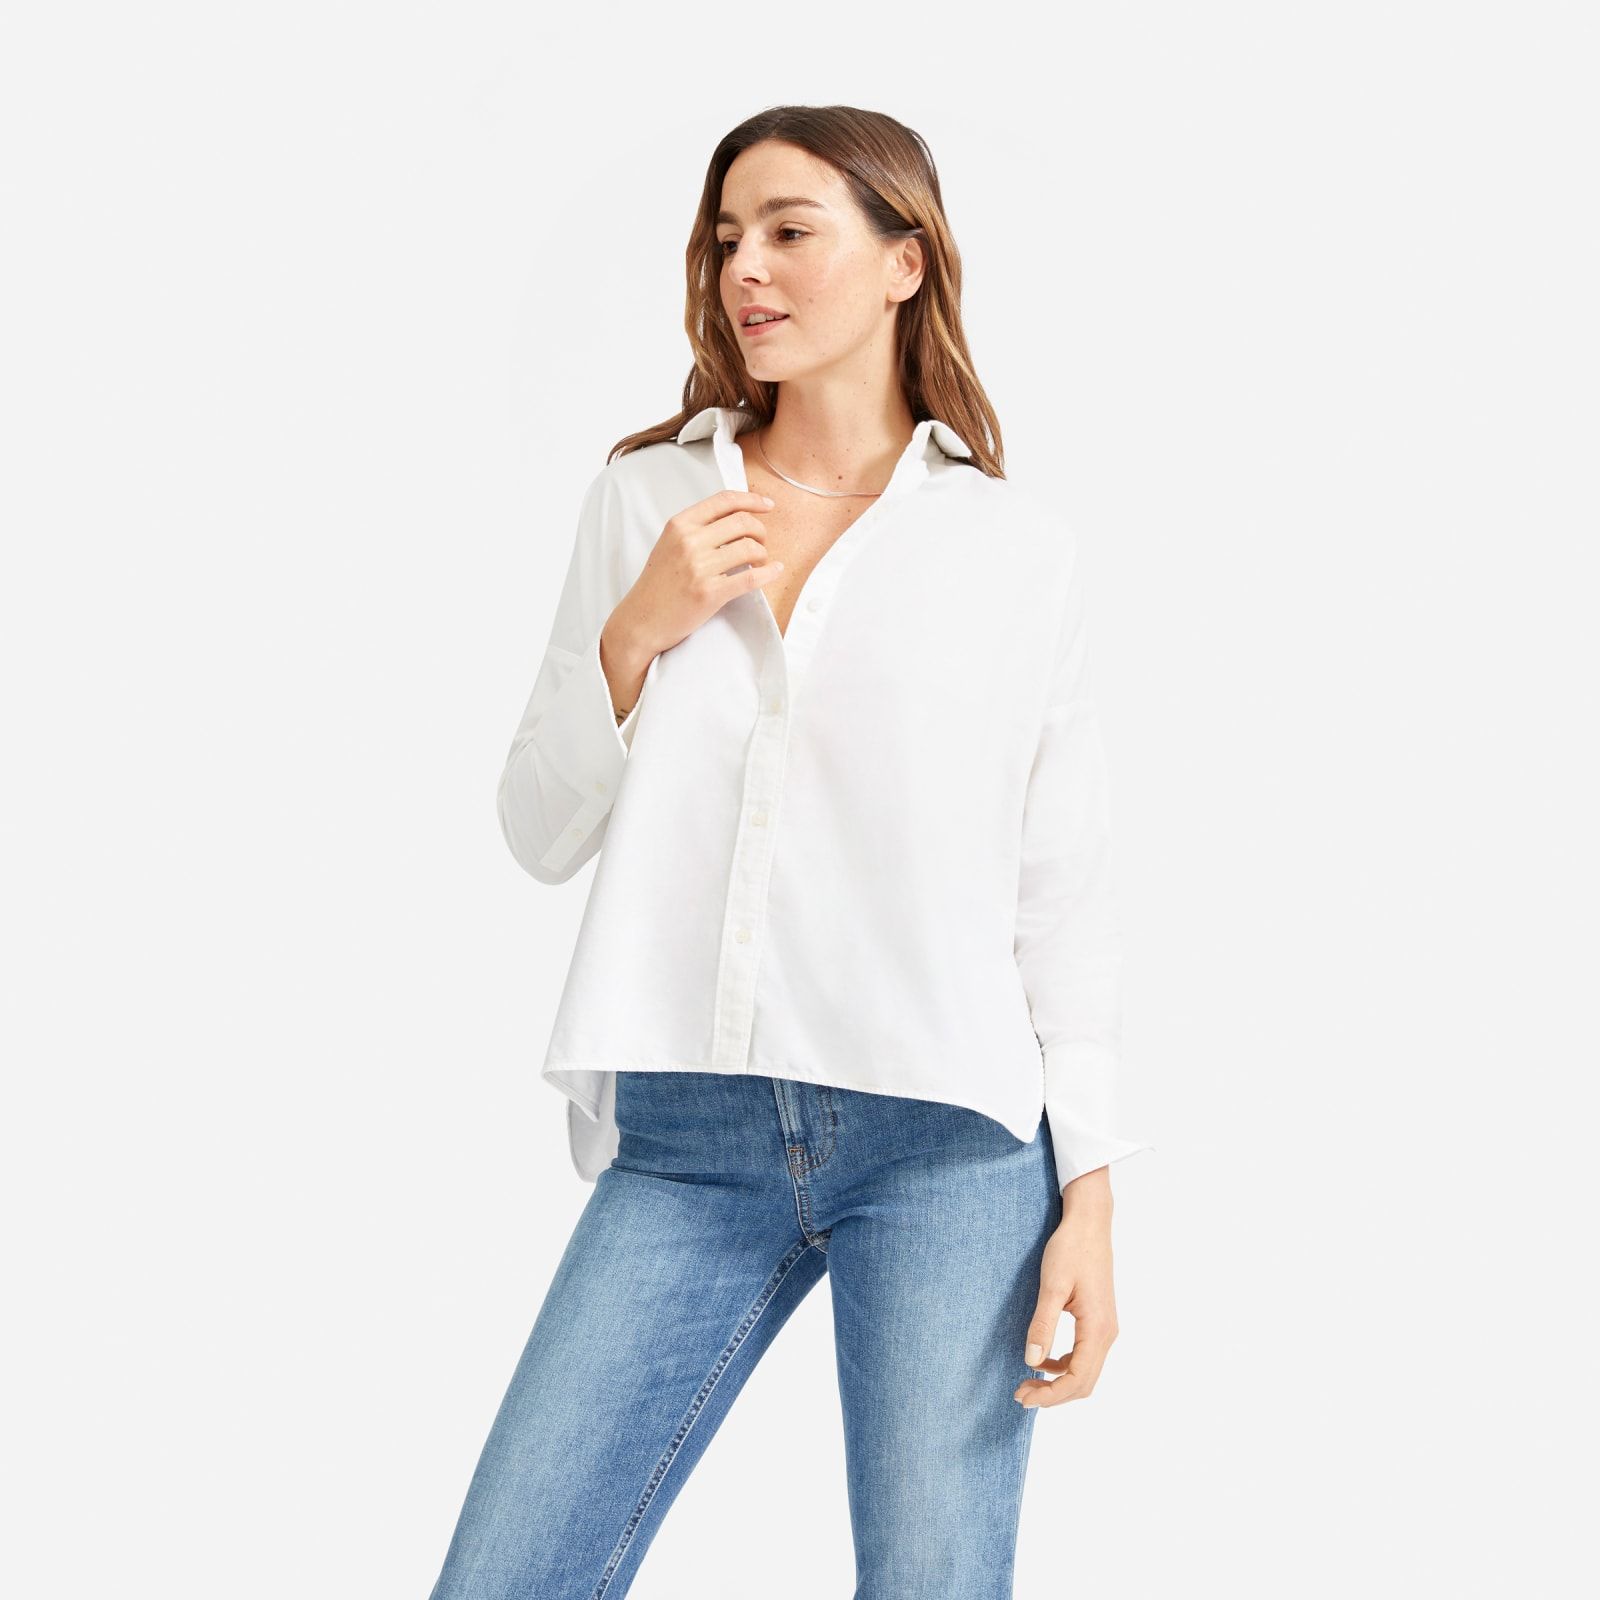 Women's Japanese Oxford Square Shirt by Everlane in White, Size 4 | Everlane